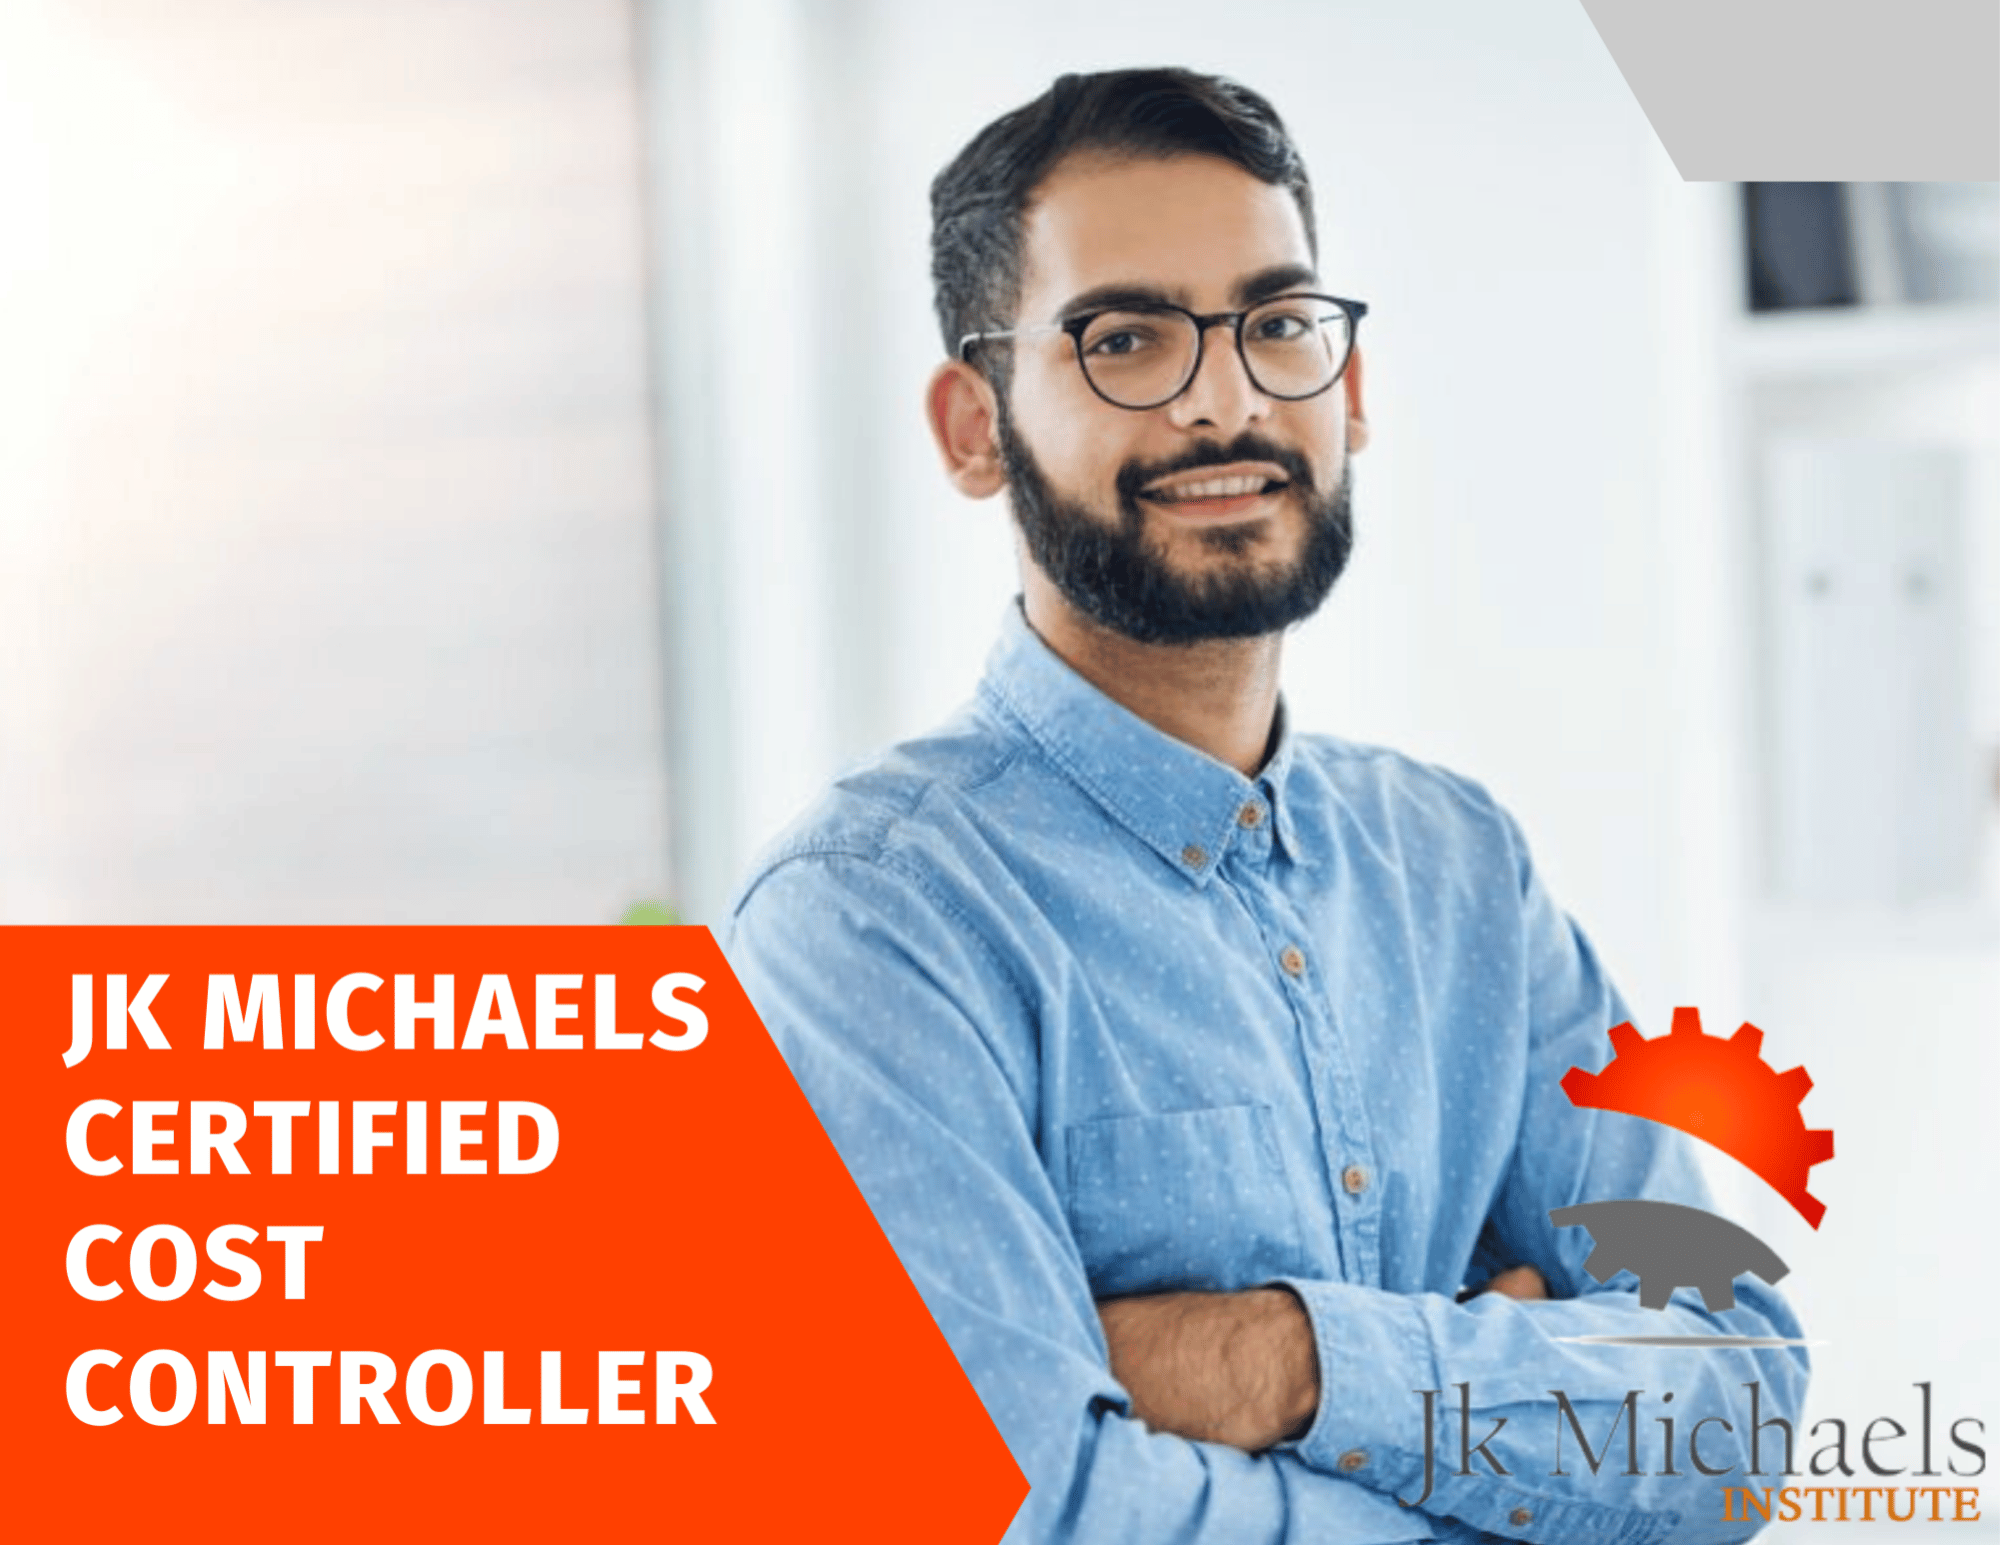 CERTIFIED COST CONTROLLER